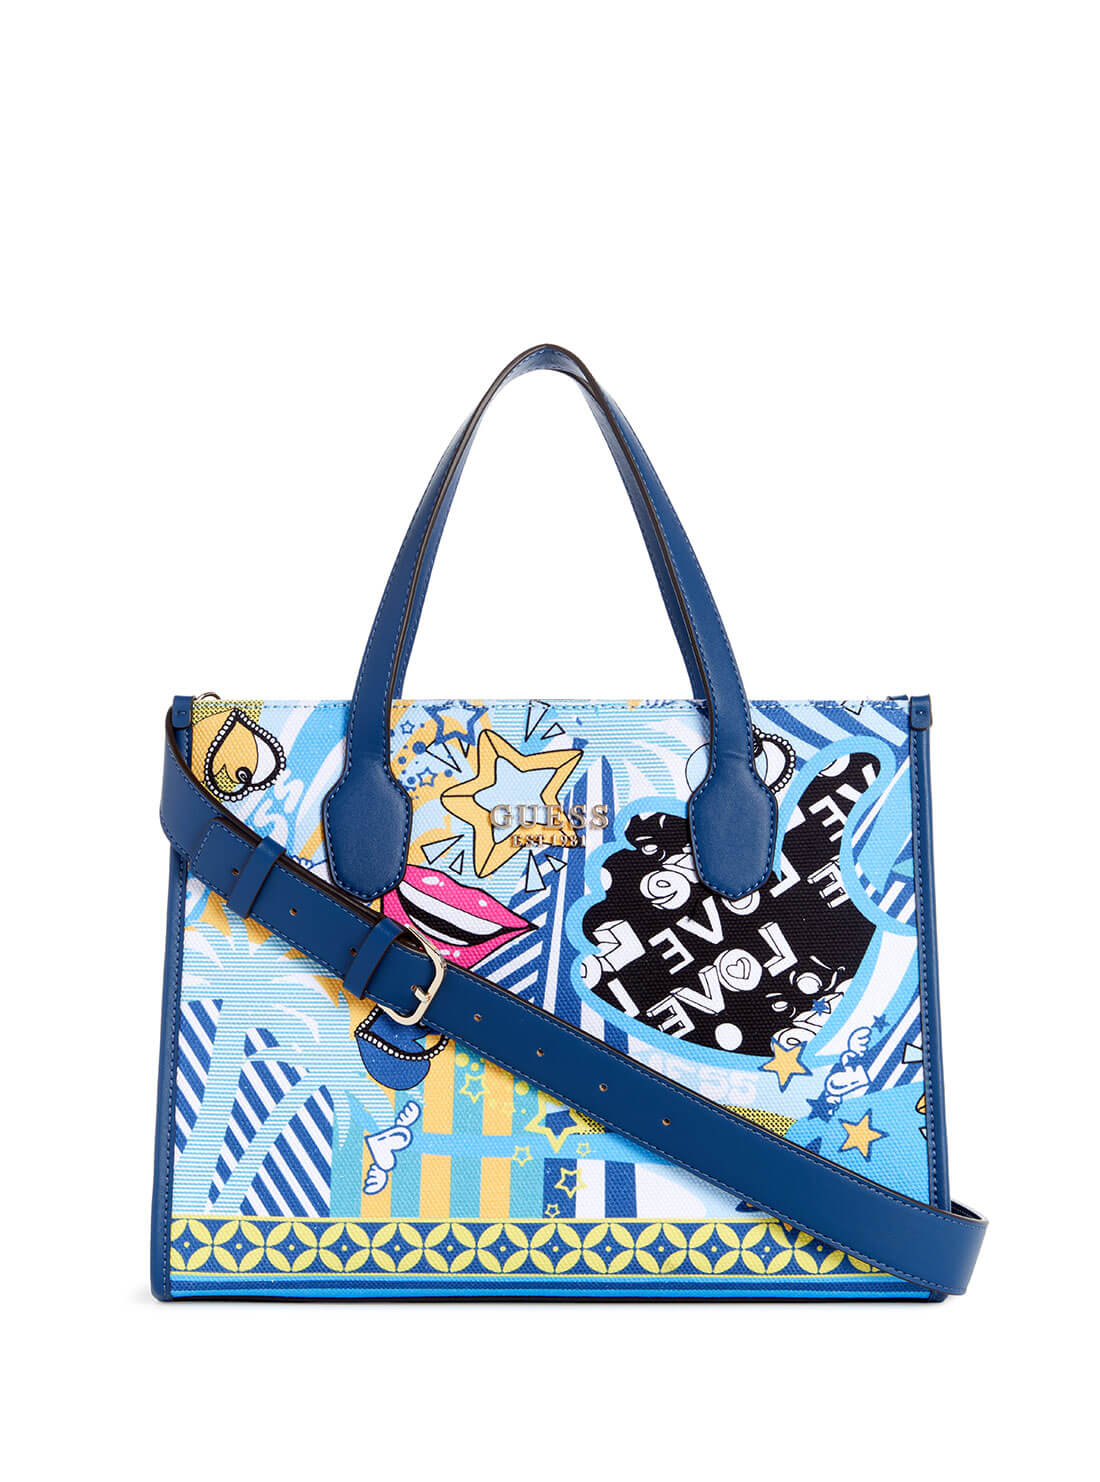 Blue Graphic Silvana Small Tote Bag | GUESS Women's Handbags | front view